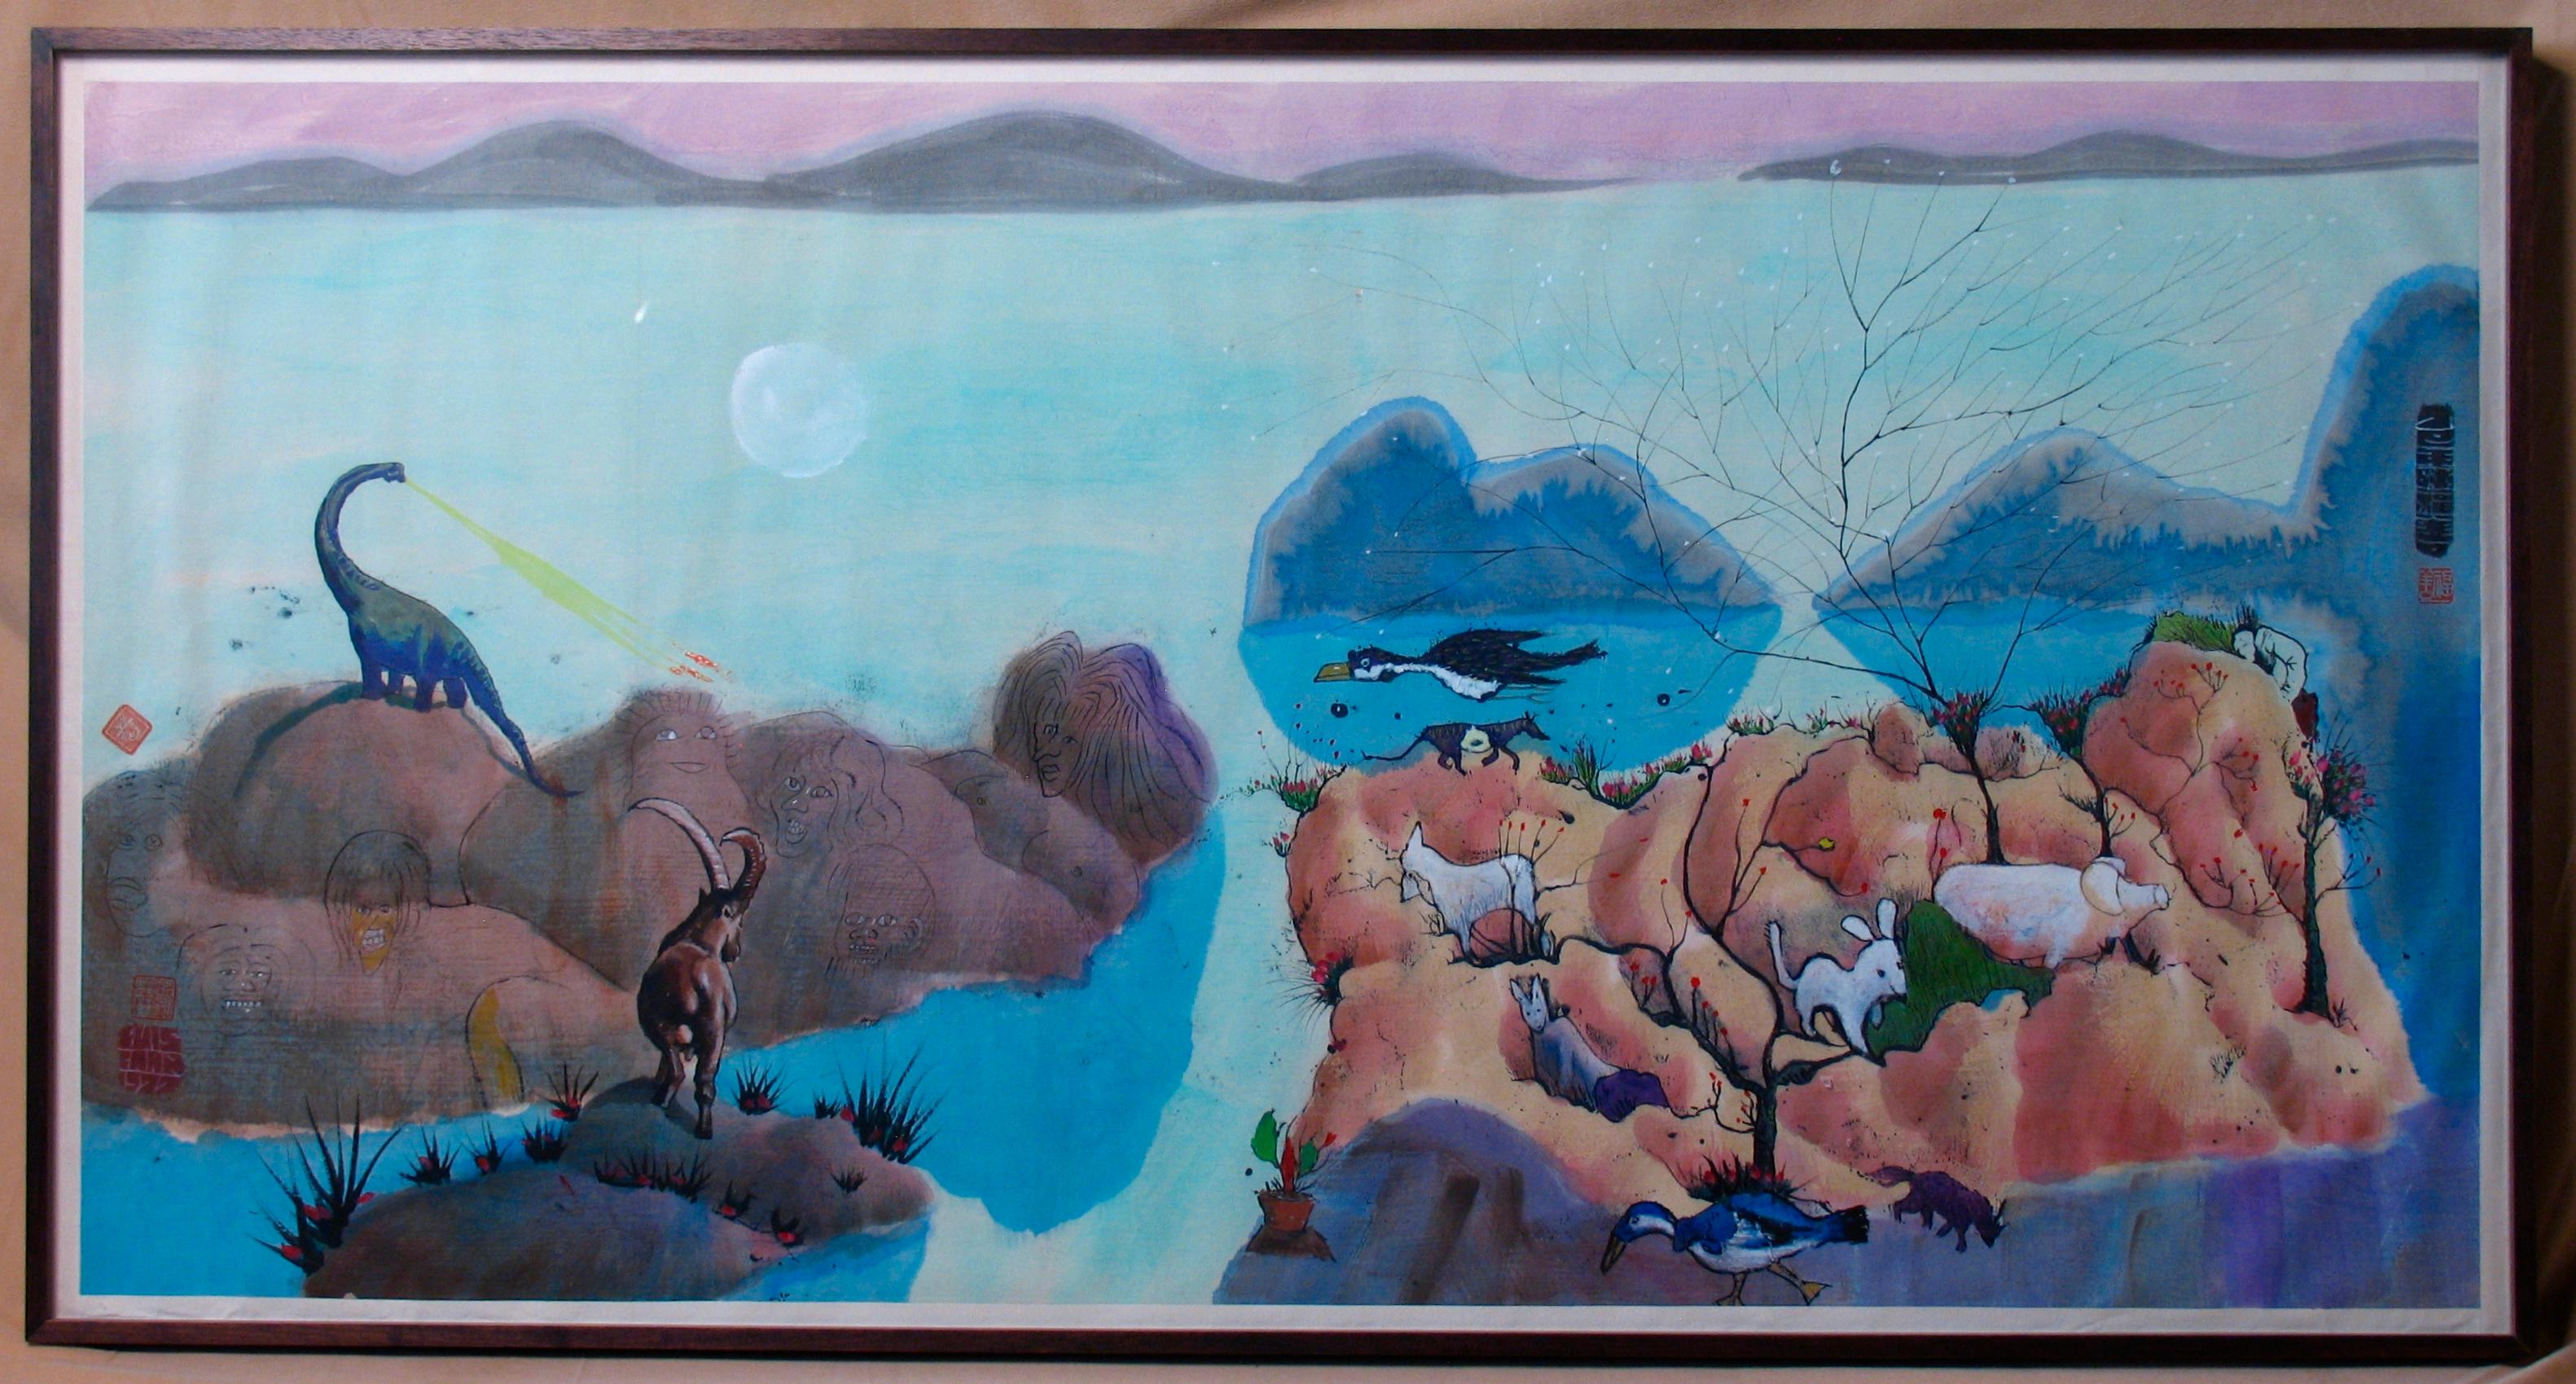 Chinese ink and water colors painted on paper by the artist, Luis Chan (Chen Fushan) 1905-1995, a fantasy landscape depicting islands in a dream blue sea, one barren island formed of human form ghosts inhabited by one isolated fire breathing